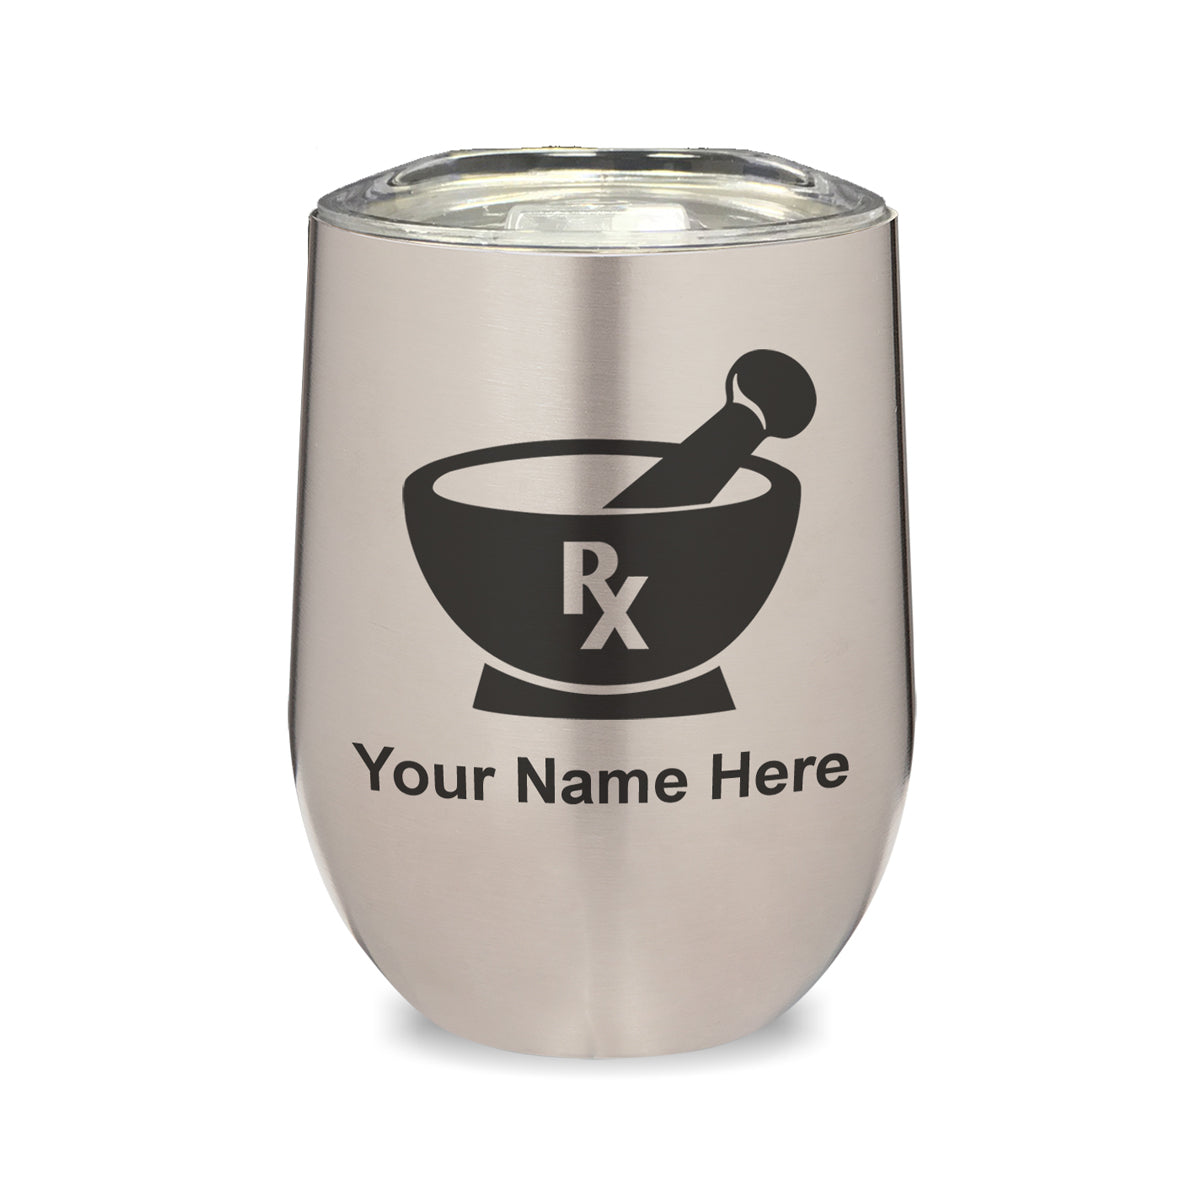 LaserGram Double Wall Stainless Steel Wine Glass, Rx Pharmacy Symbol, Personalized Engraving Included